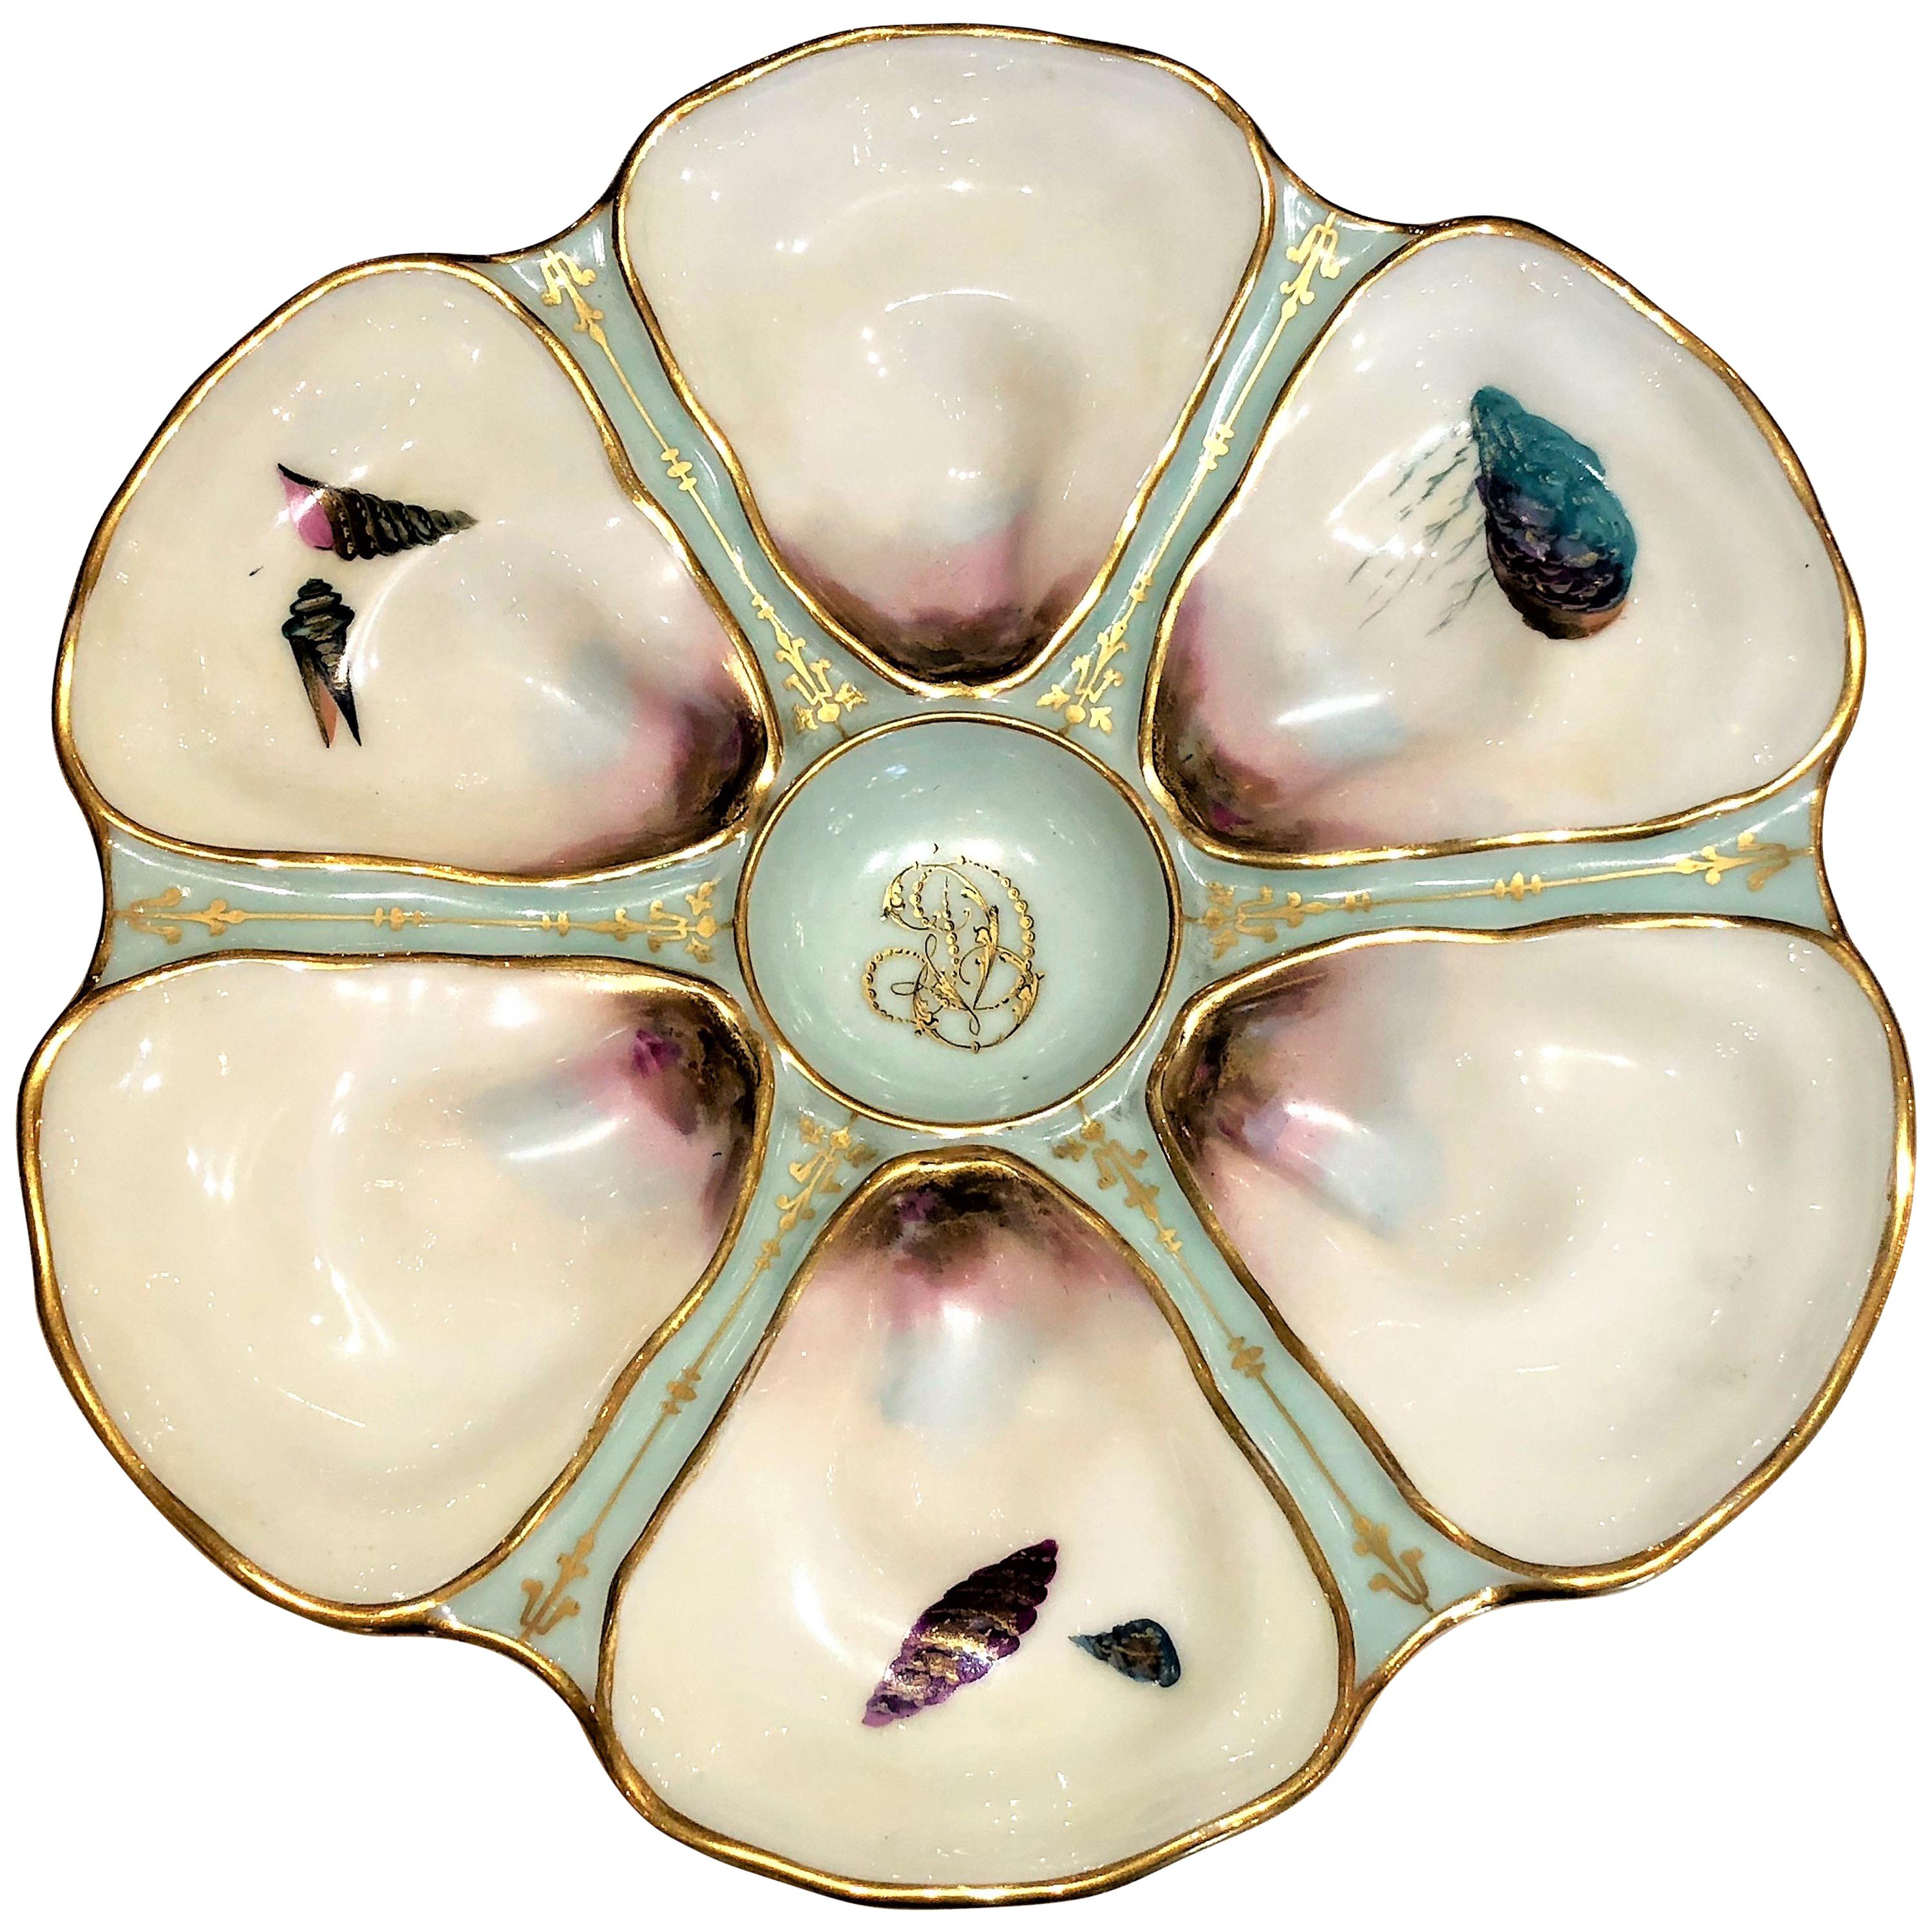 Antique French Limoges Hand-Painted Porcelain Oyster Plate, circa 1900